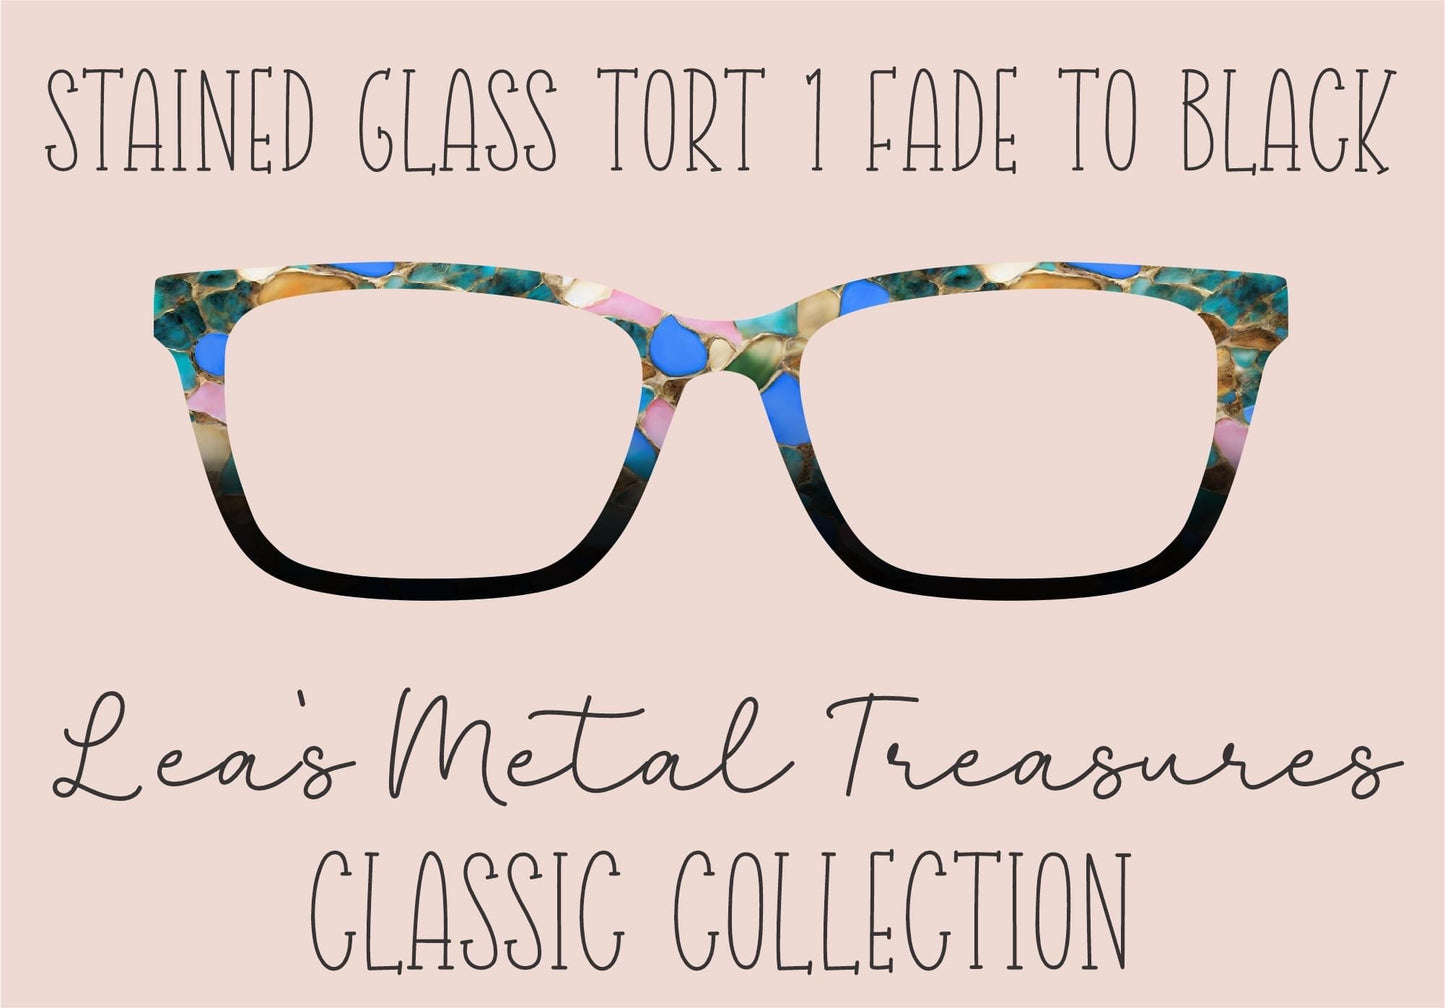 Stained Glass Tort 1 fade to Black